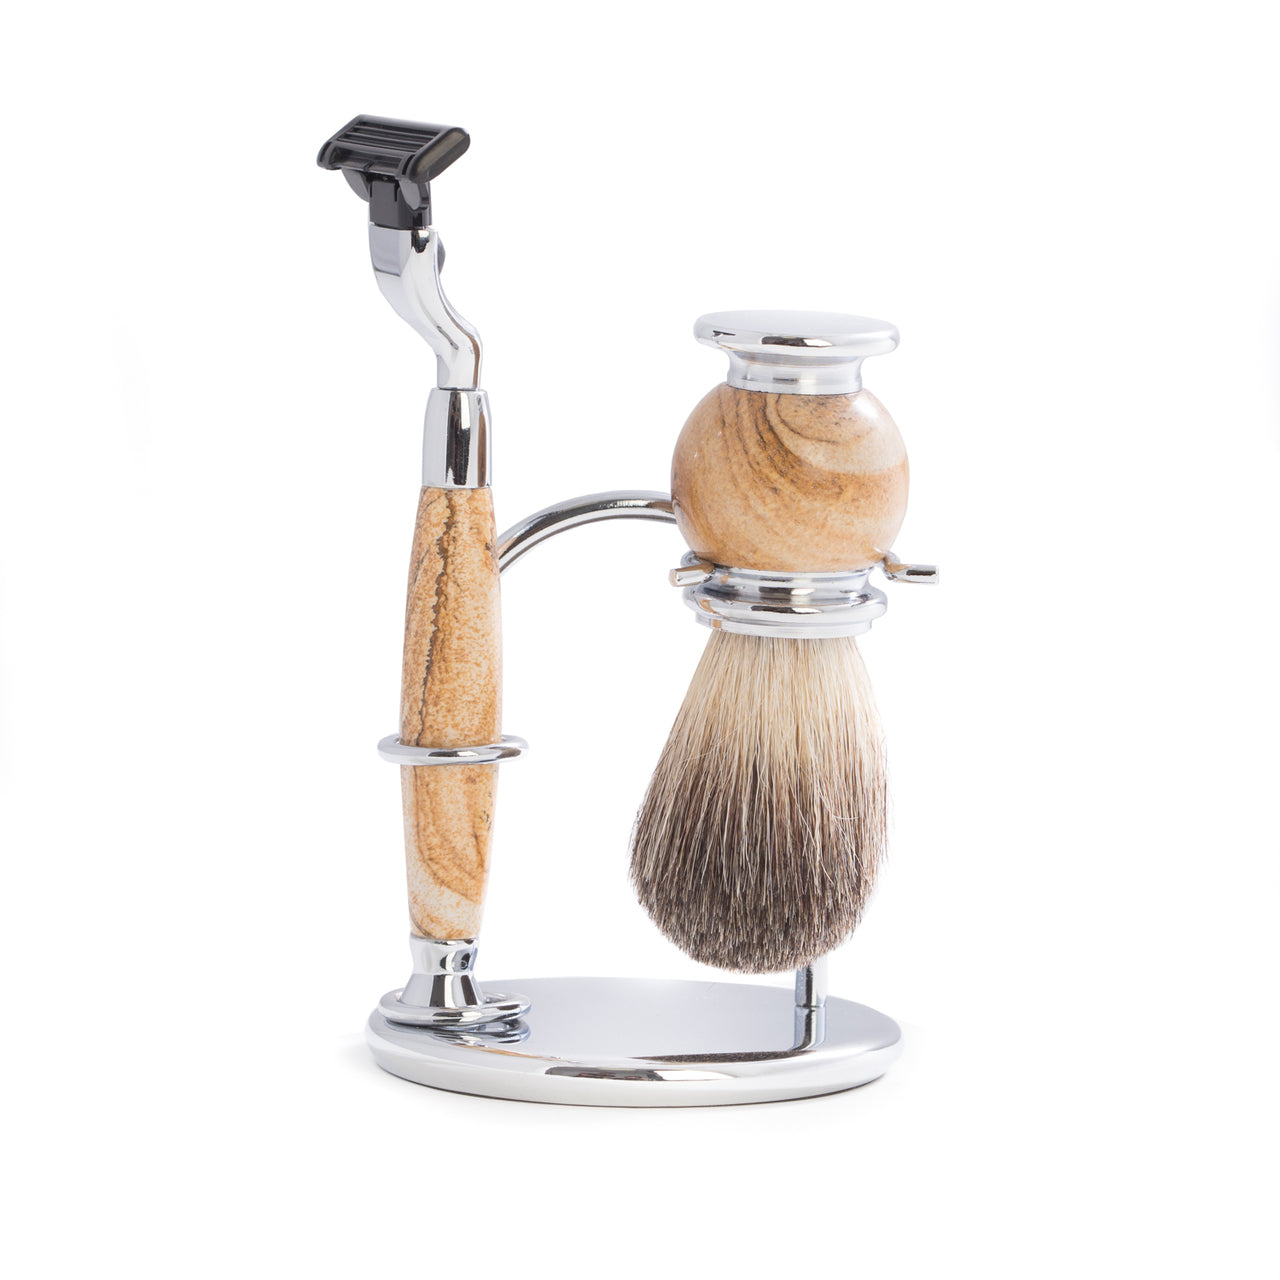 "Mach 3" Razor & Pure Badger Brush on Chrome with Tan Stone Stand